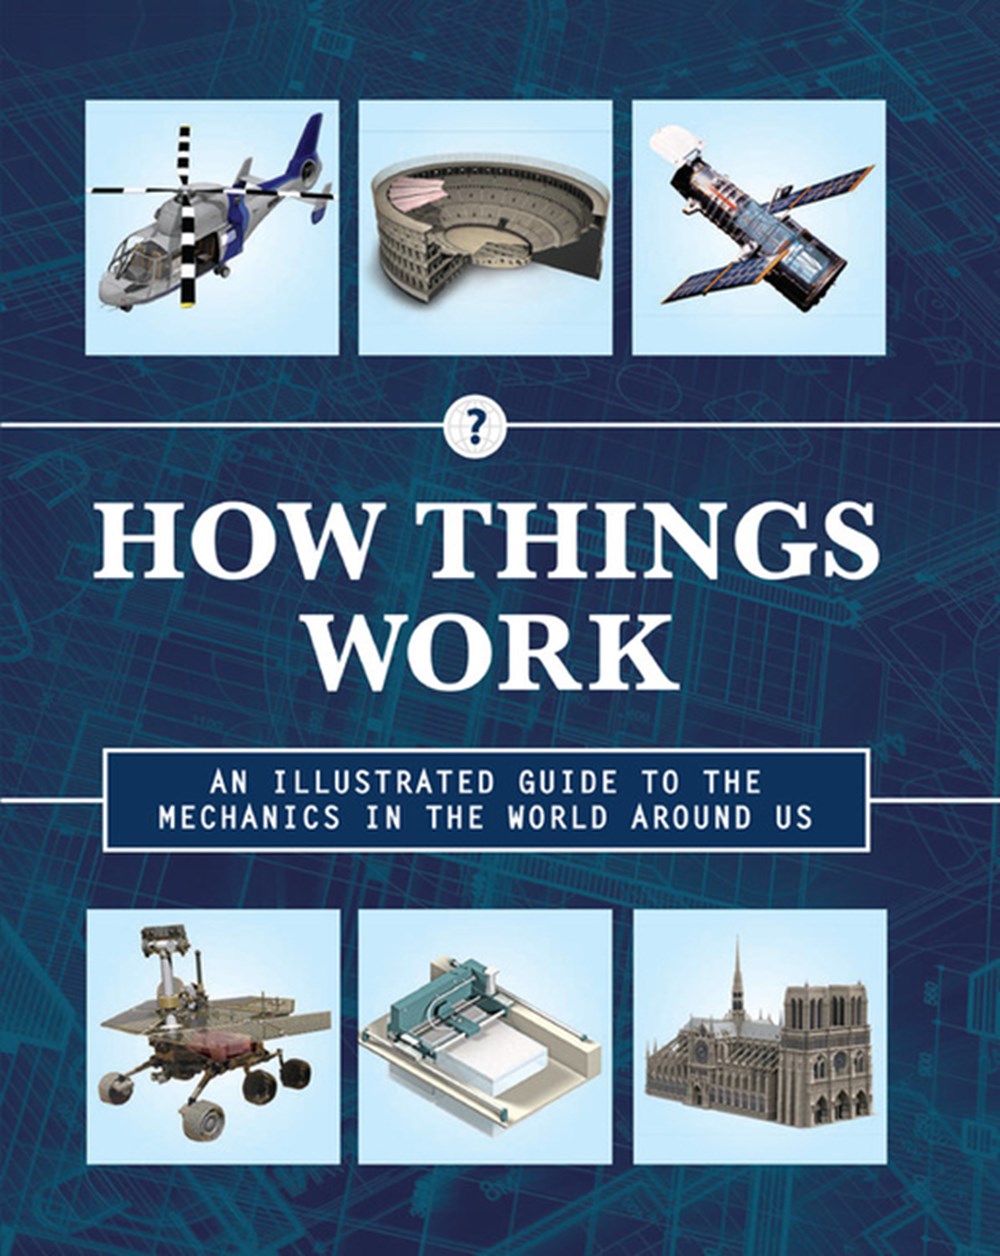 How Things Work An Illustrated Guide to the Mechanics Behind the World Around Us